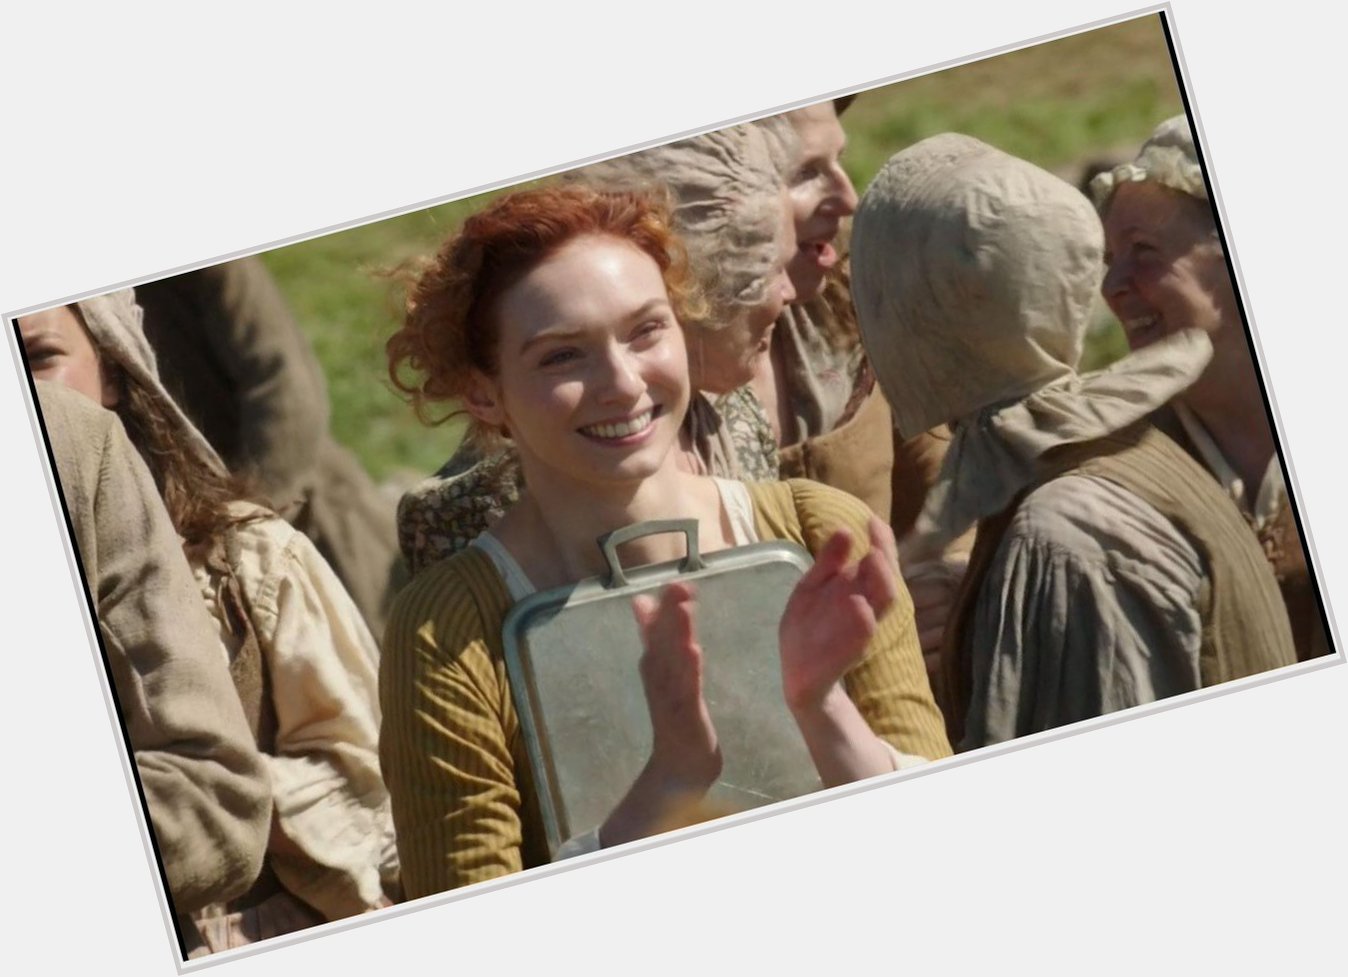 Happy Birthday to Eleanor Tomlinson who brings our Demelza to life in 